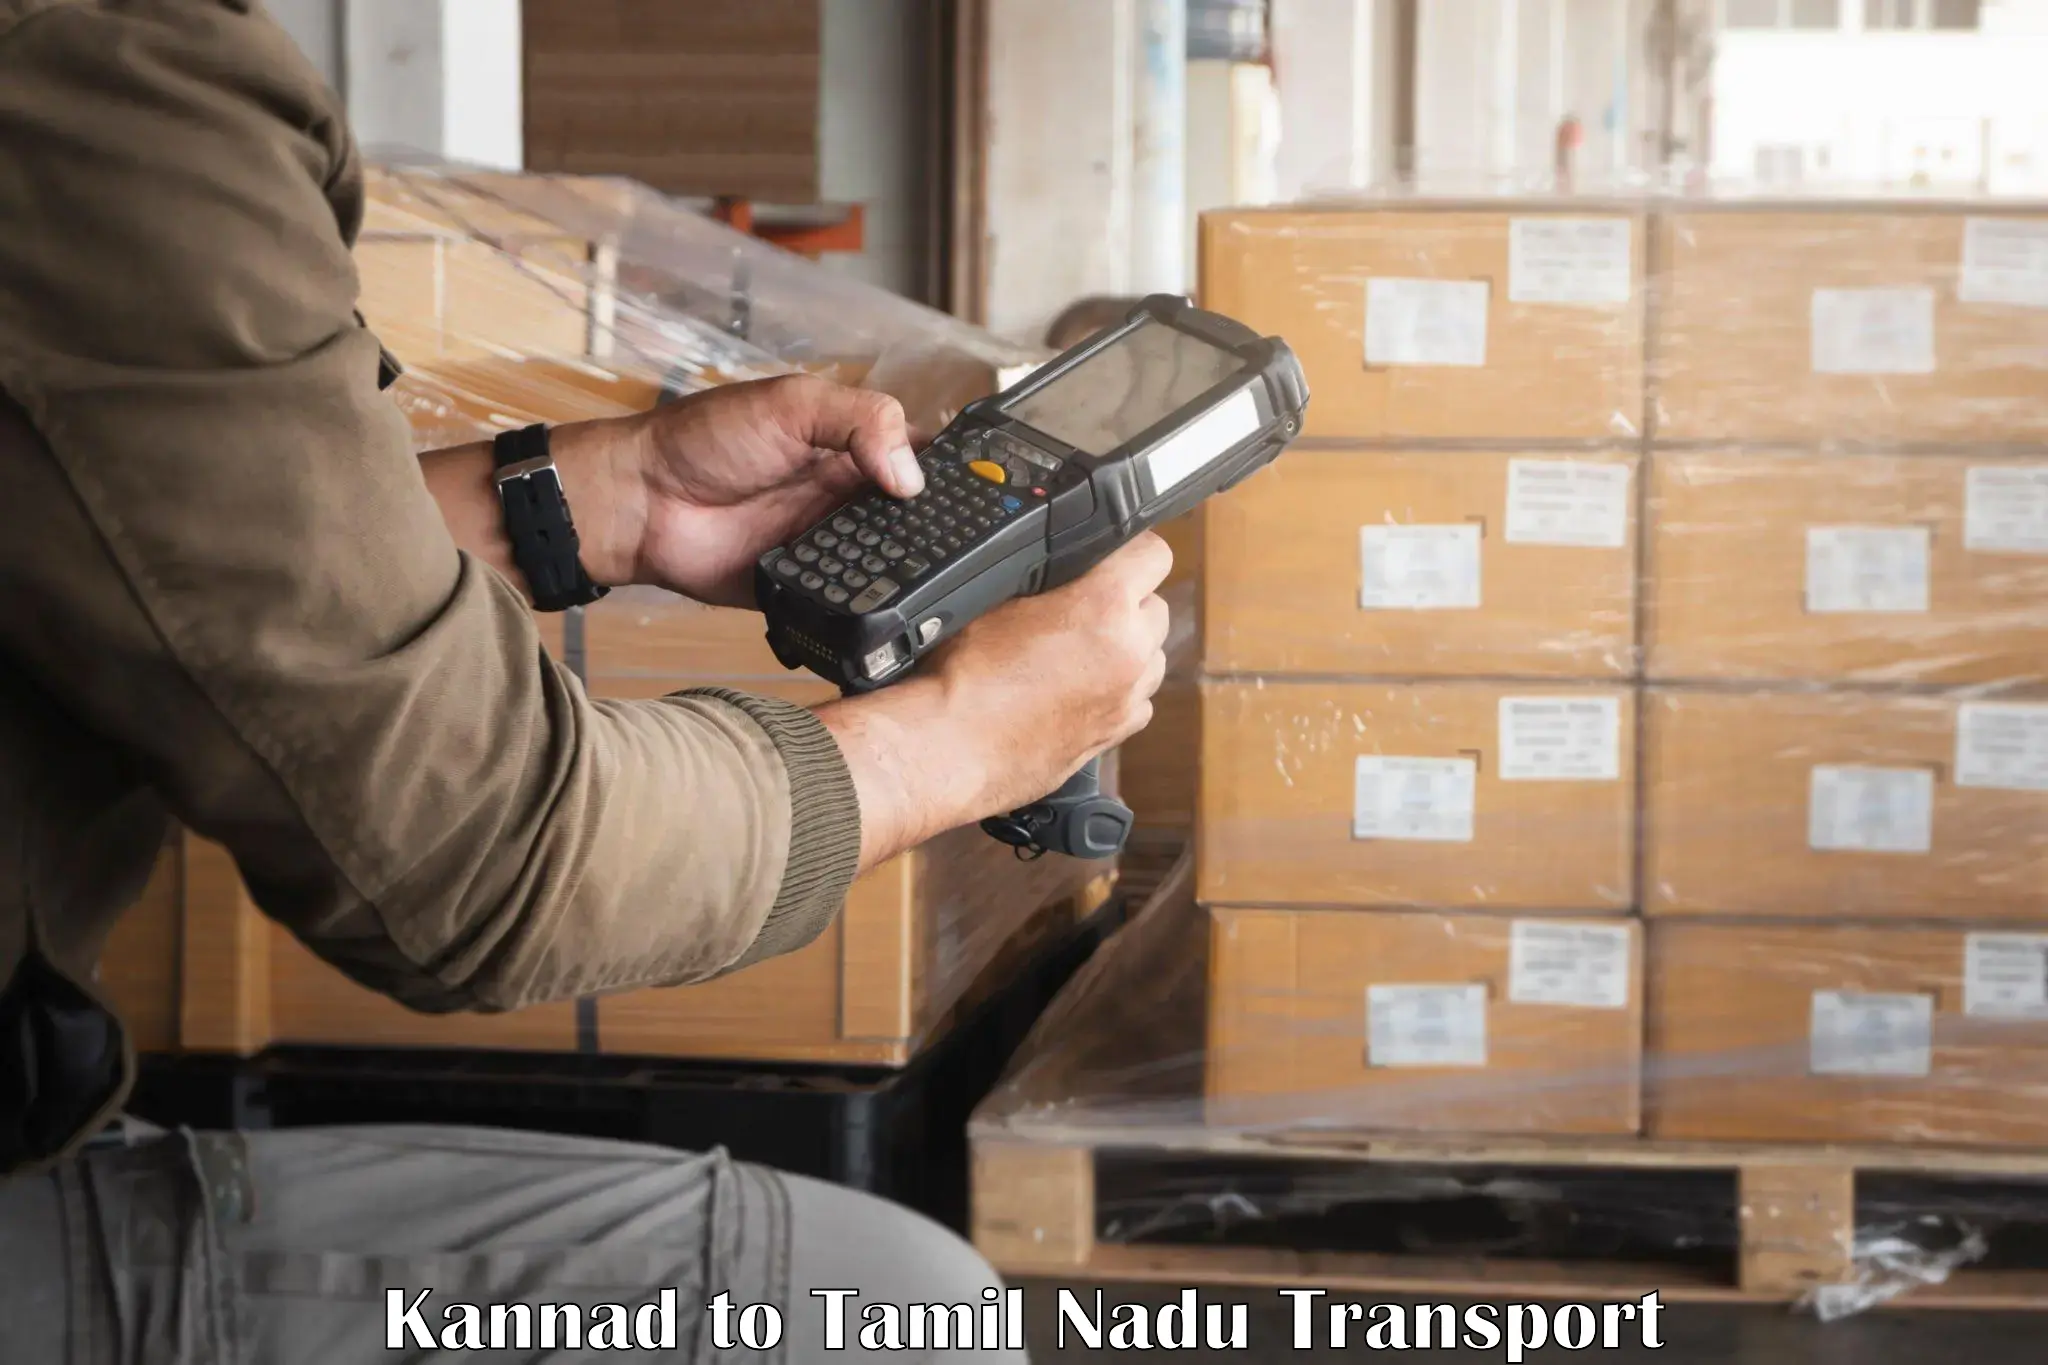 Container transport service Kannad to Padi